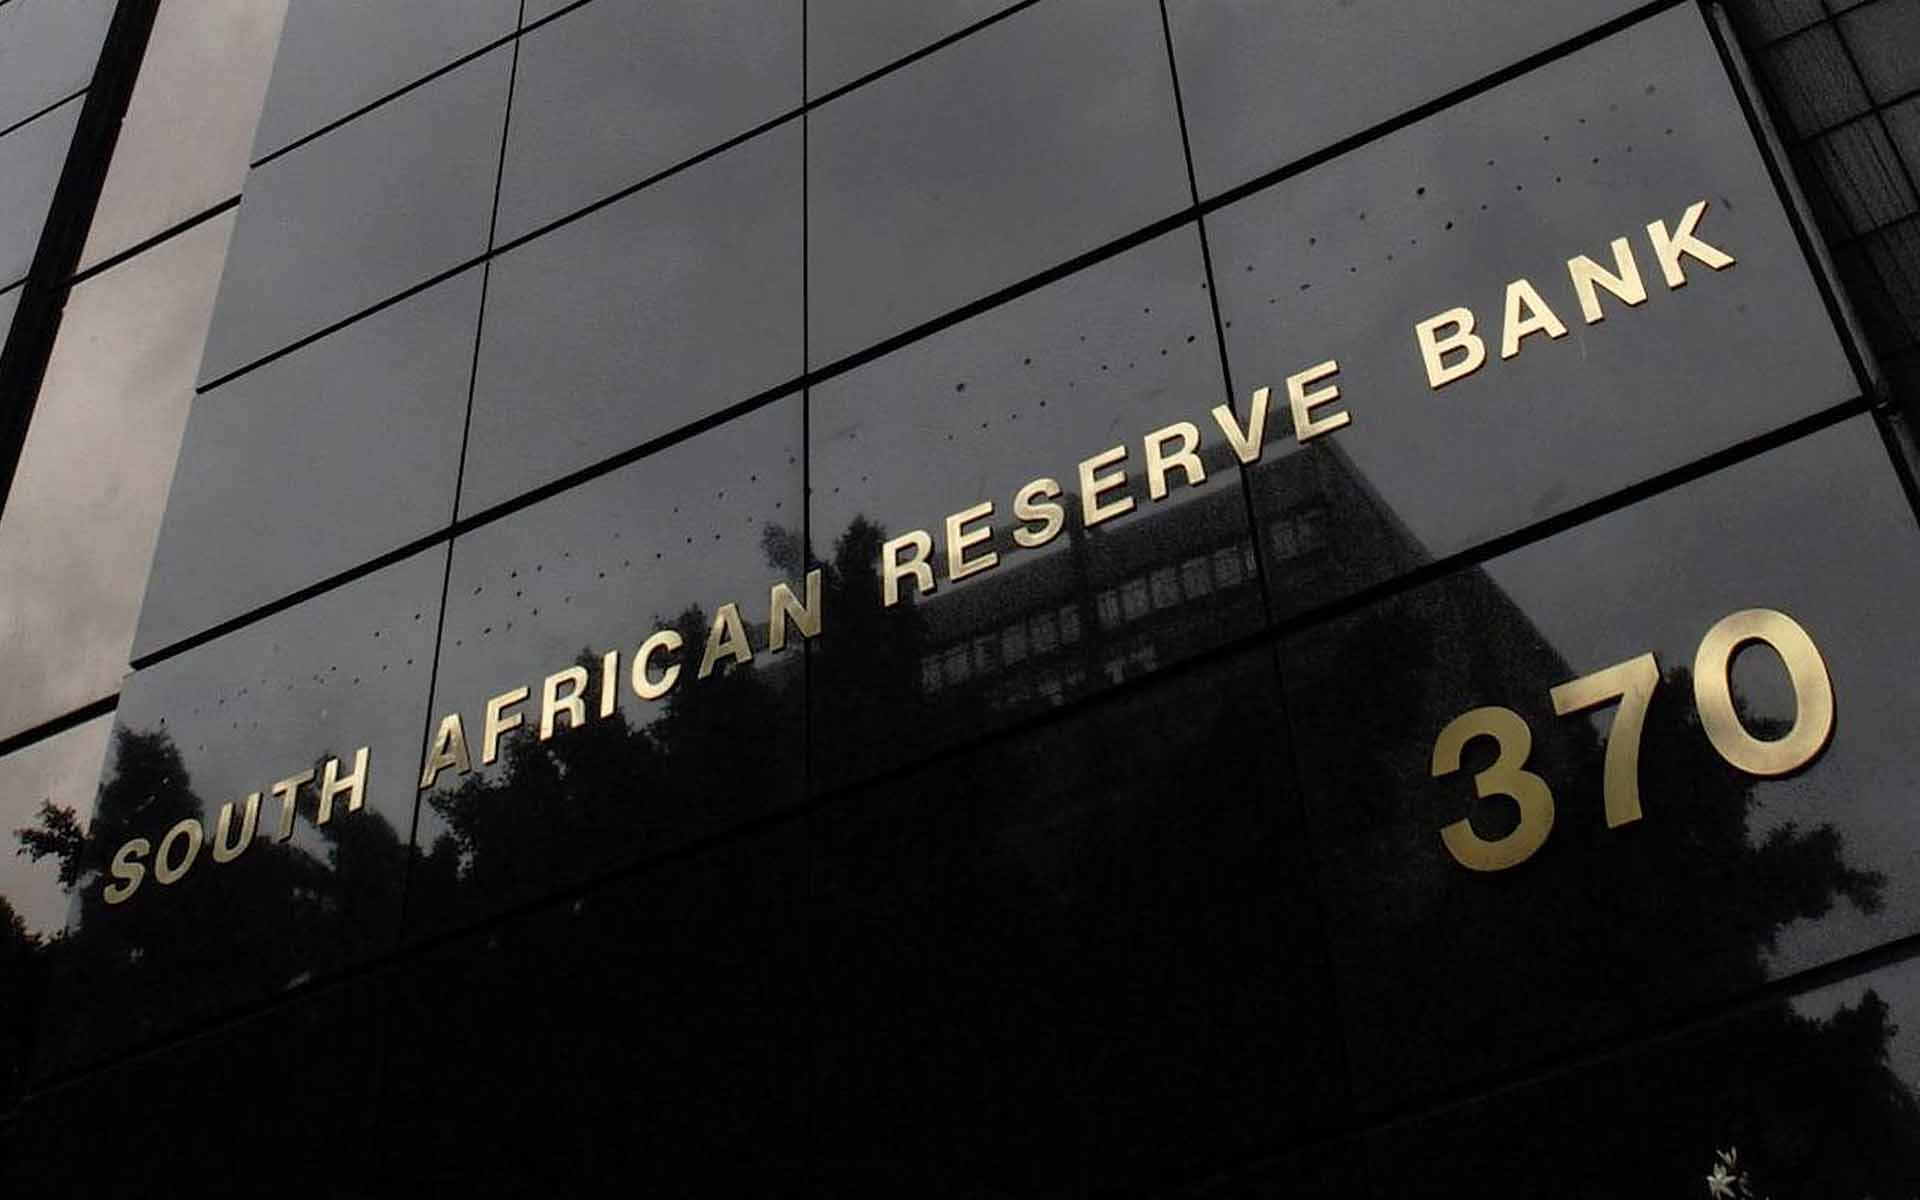 South Africa Reserve Bank (SARB): Virtual Currencies Are 'Cyber-tokens'